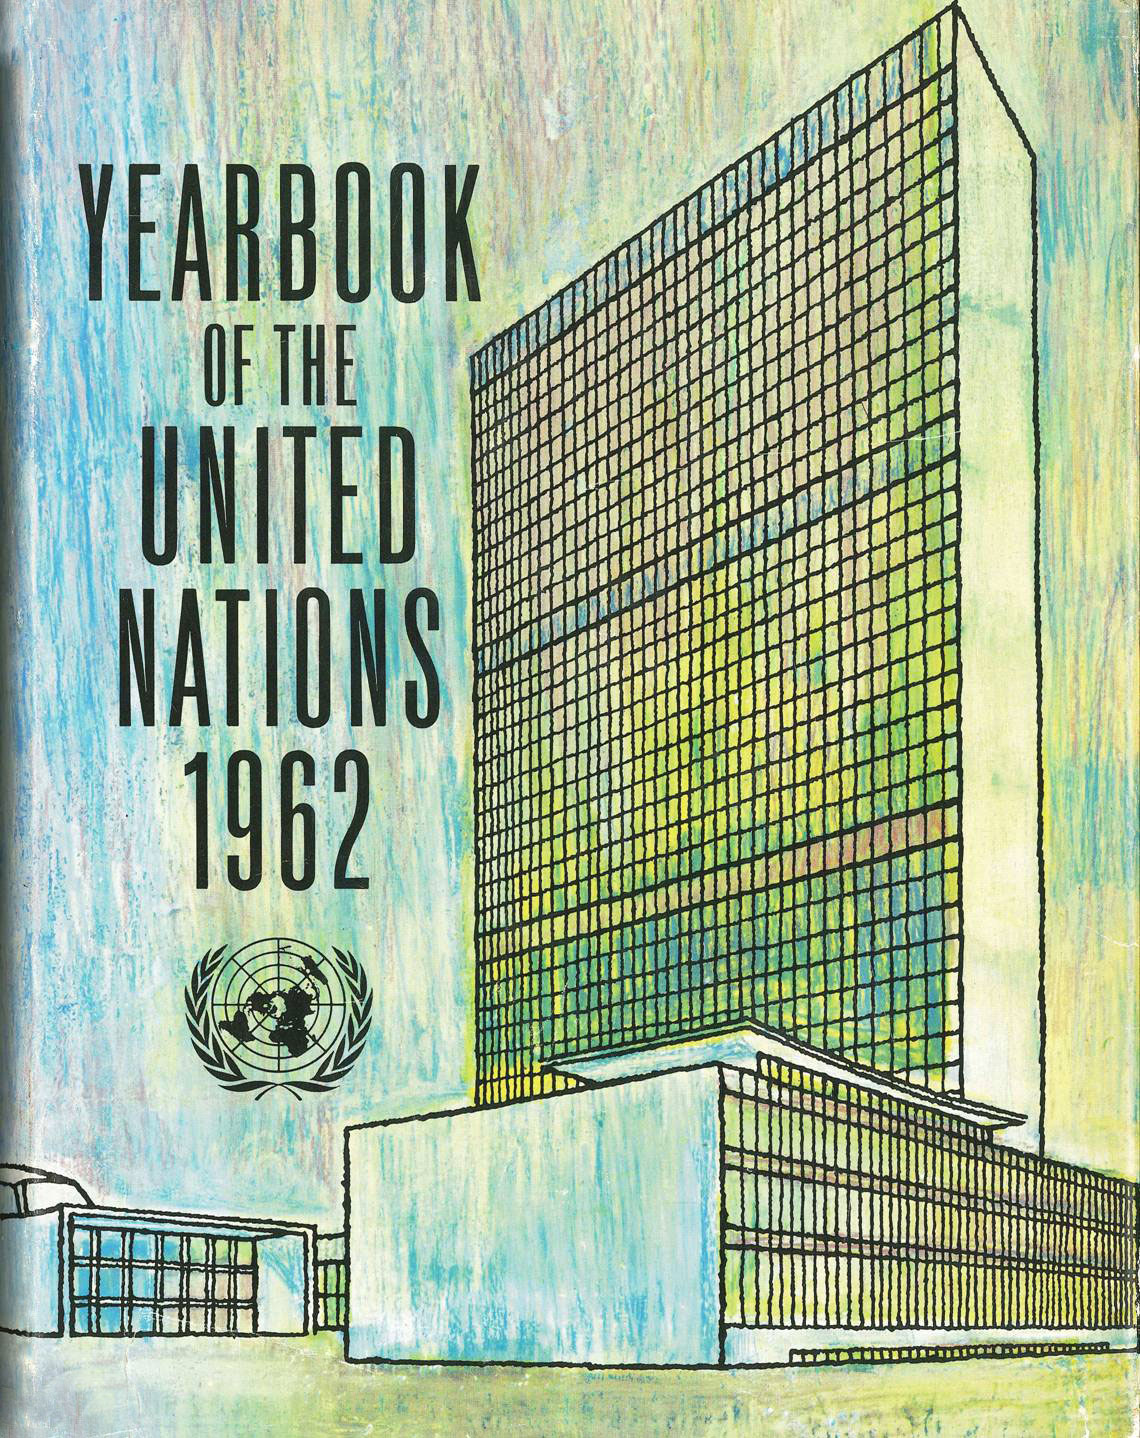 image of Yearbook of the United Nations 1962